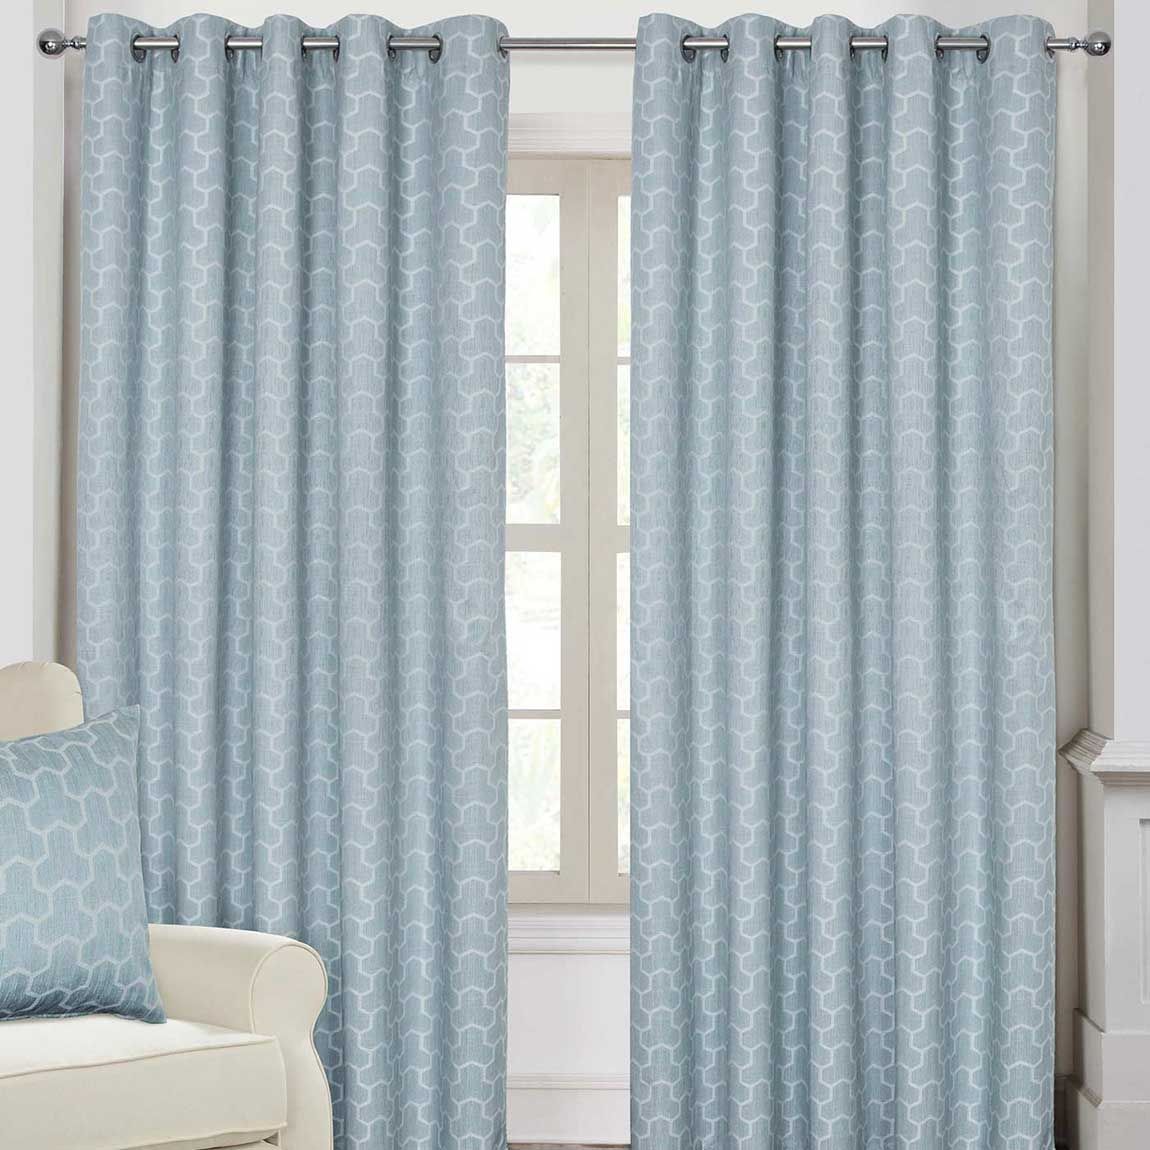 Curtina Feather Jacquard Eyelet Lined Curtains 